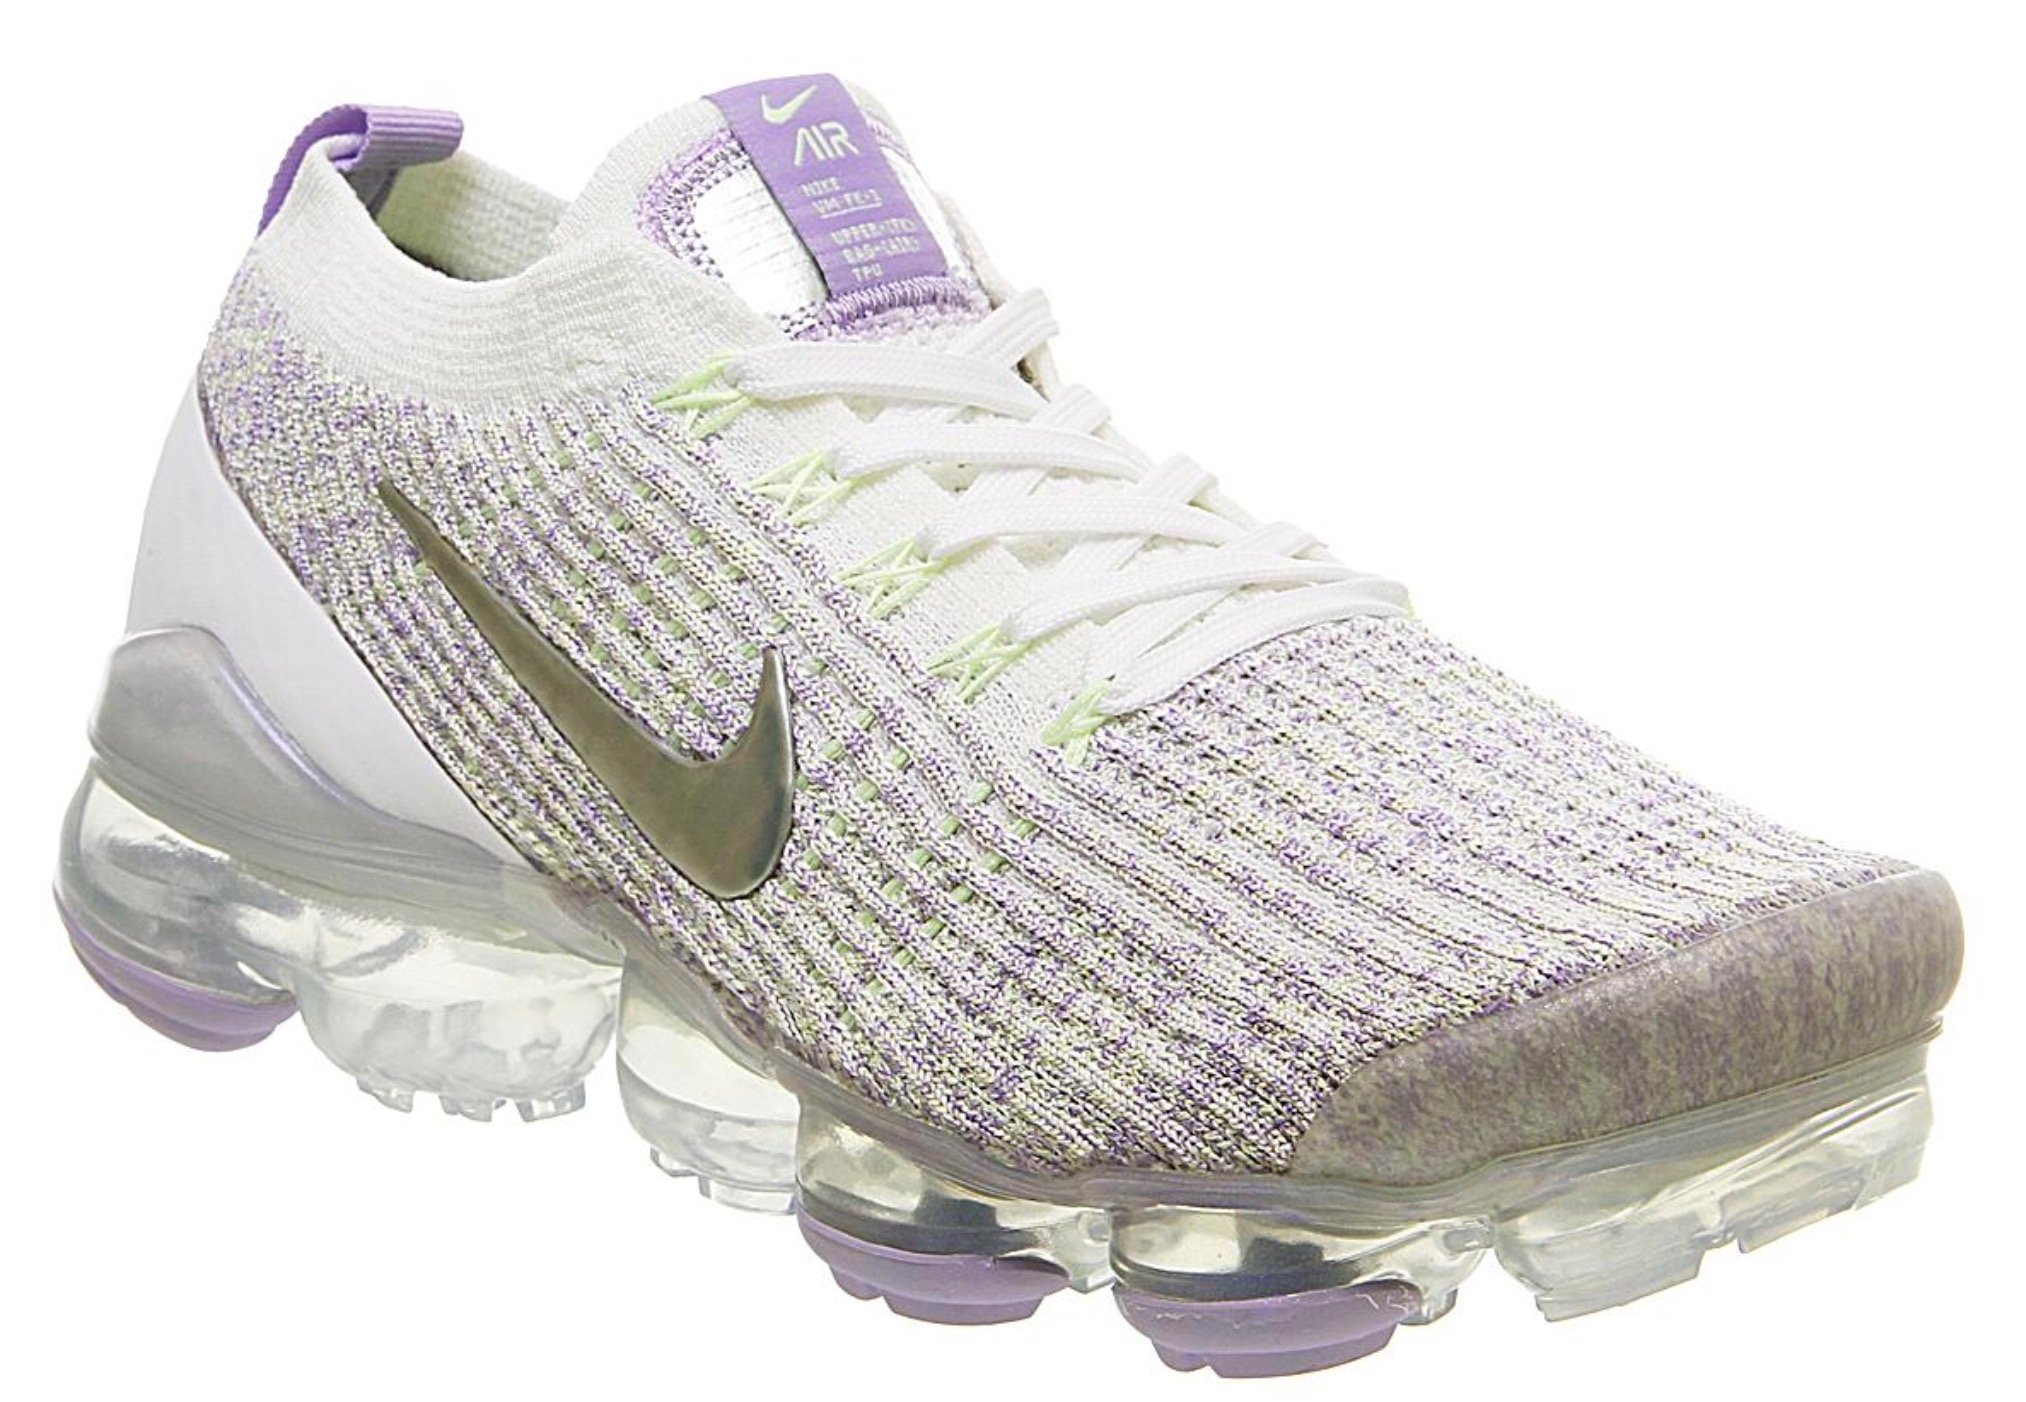 white and purple vapormax